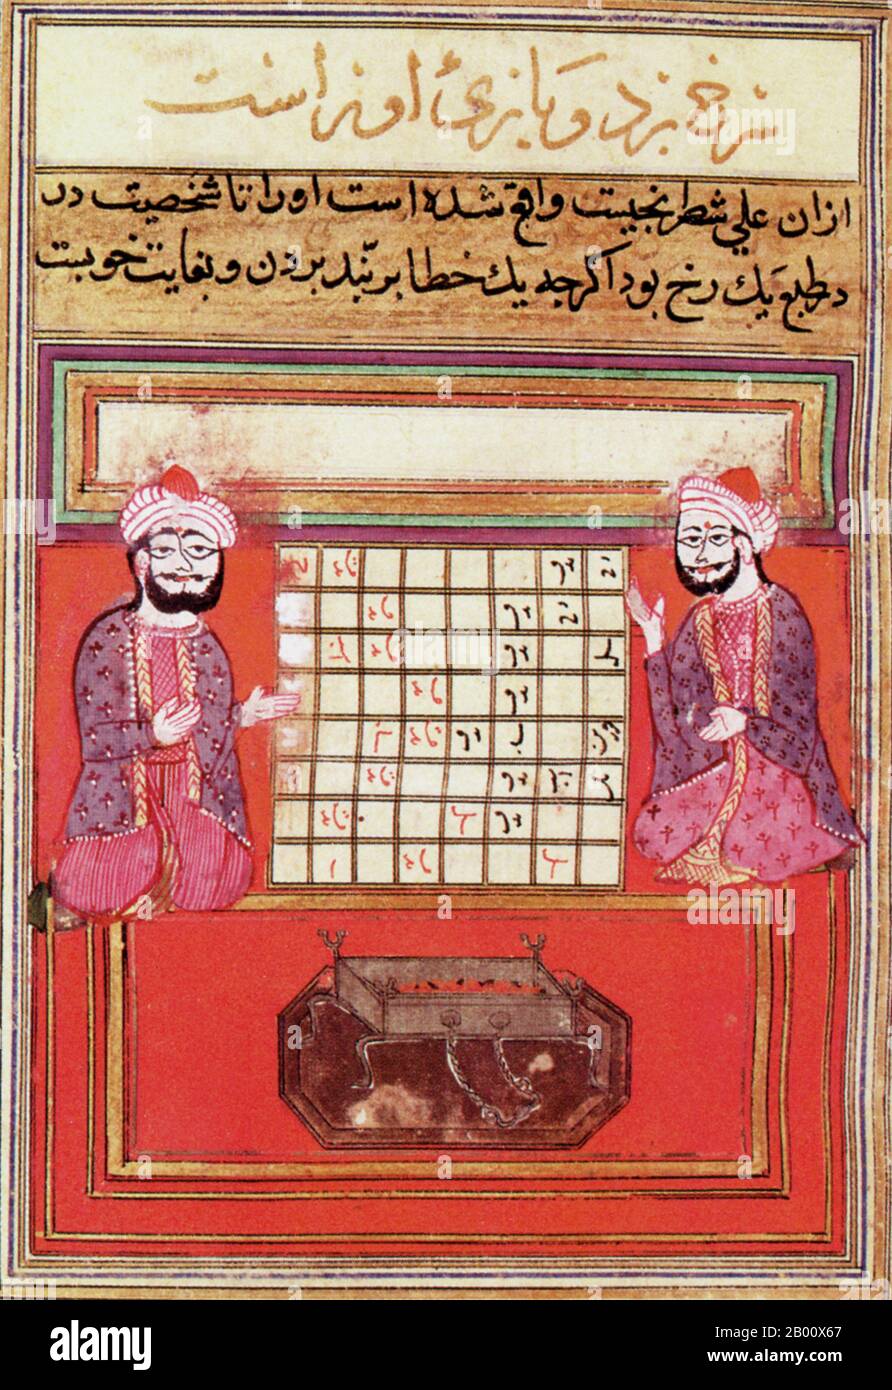 Iran/Iraq: An illustration from a Persian monograph on chess, 14th century.  Most notable in this illustration are the expressive faces and animated gestures that the players display. The 9th-century historian al-Mas'udi wrote that such 'pleasantry and jests' were customary among chess players in Baghdad at that time. Stock Photo